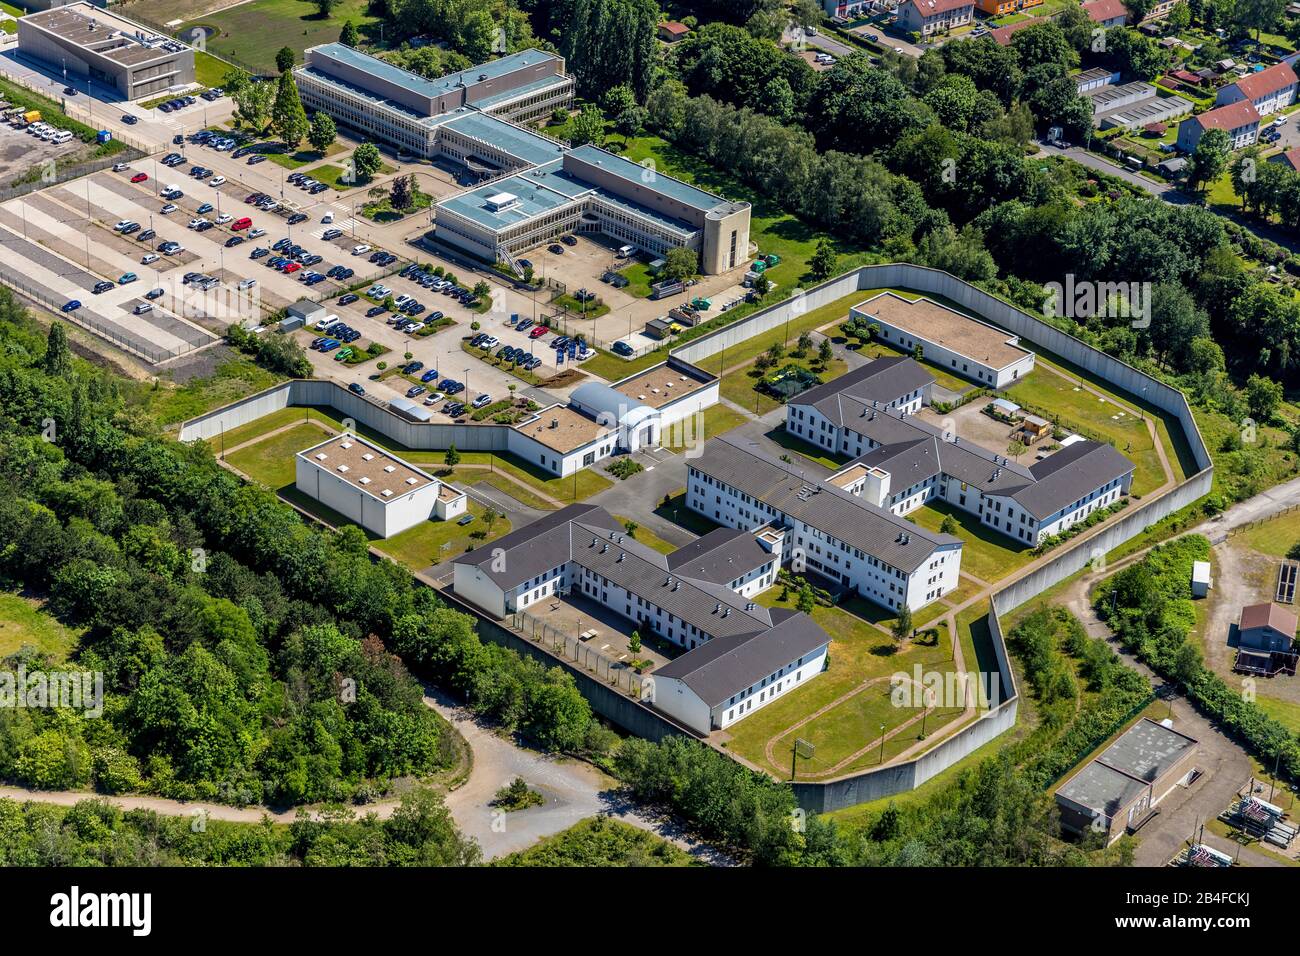 Aerial view of Forensics LWL-Massrehvollzugsklinik Herne Modern specialist clinic for therapy and safety, Haverkamp, Herne, Ruhrgebiet, North Rhine-Westphalia, Germany Stock Photo